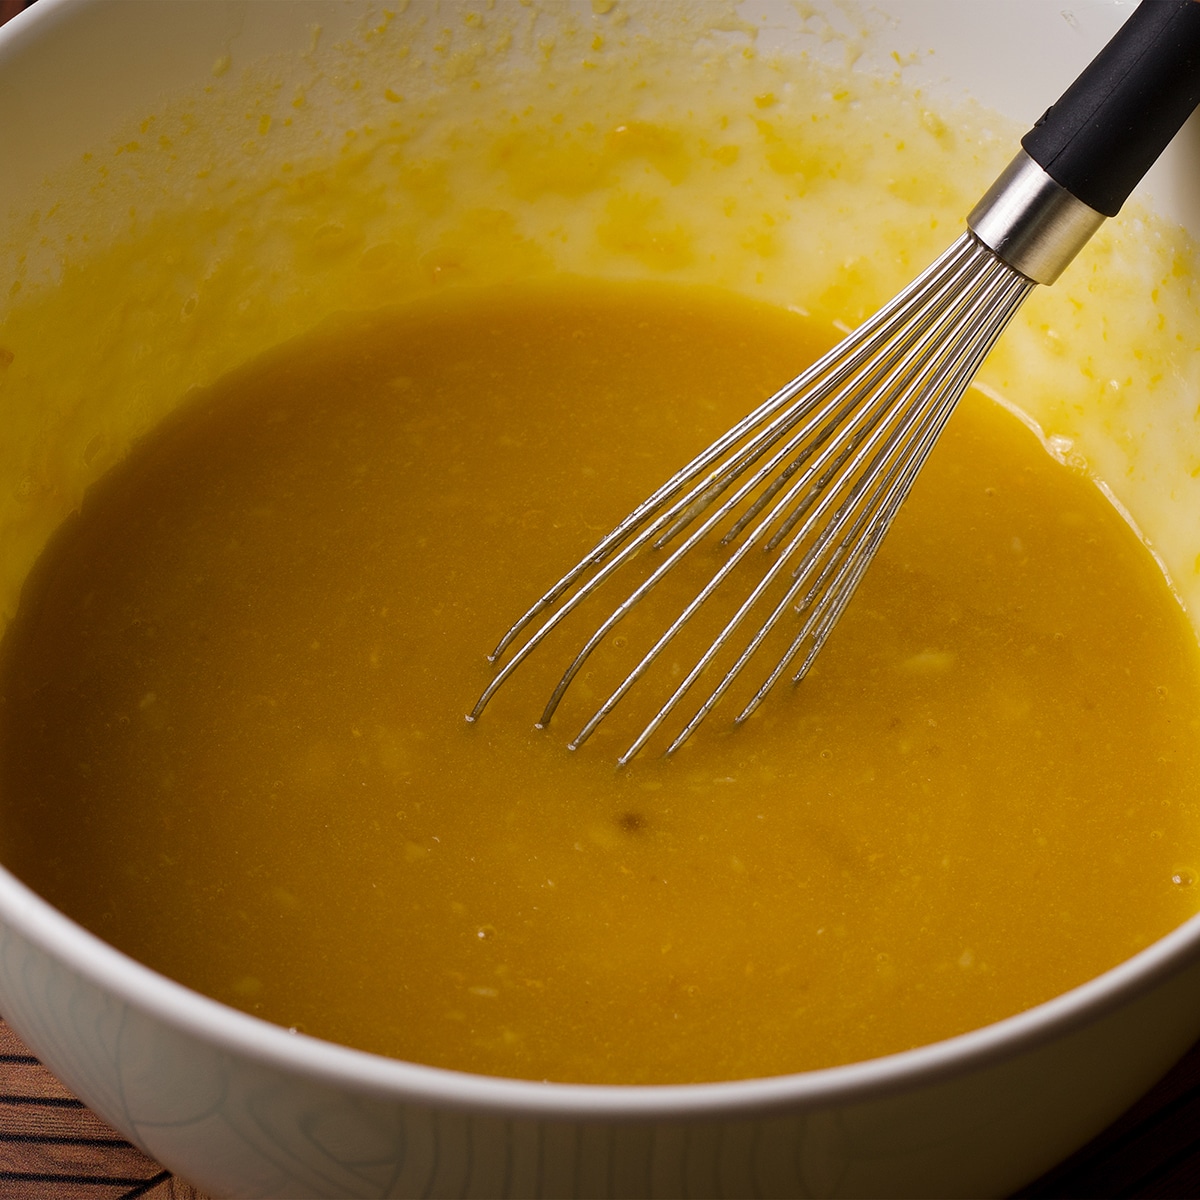 Someone using a wire whisk to mix melted butter, olive oil, honey, whole eggs and an egg yolk, lemon zest, almond extract, and sour cream in a white bowl.